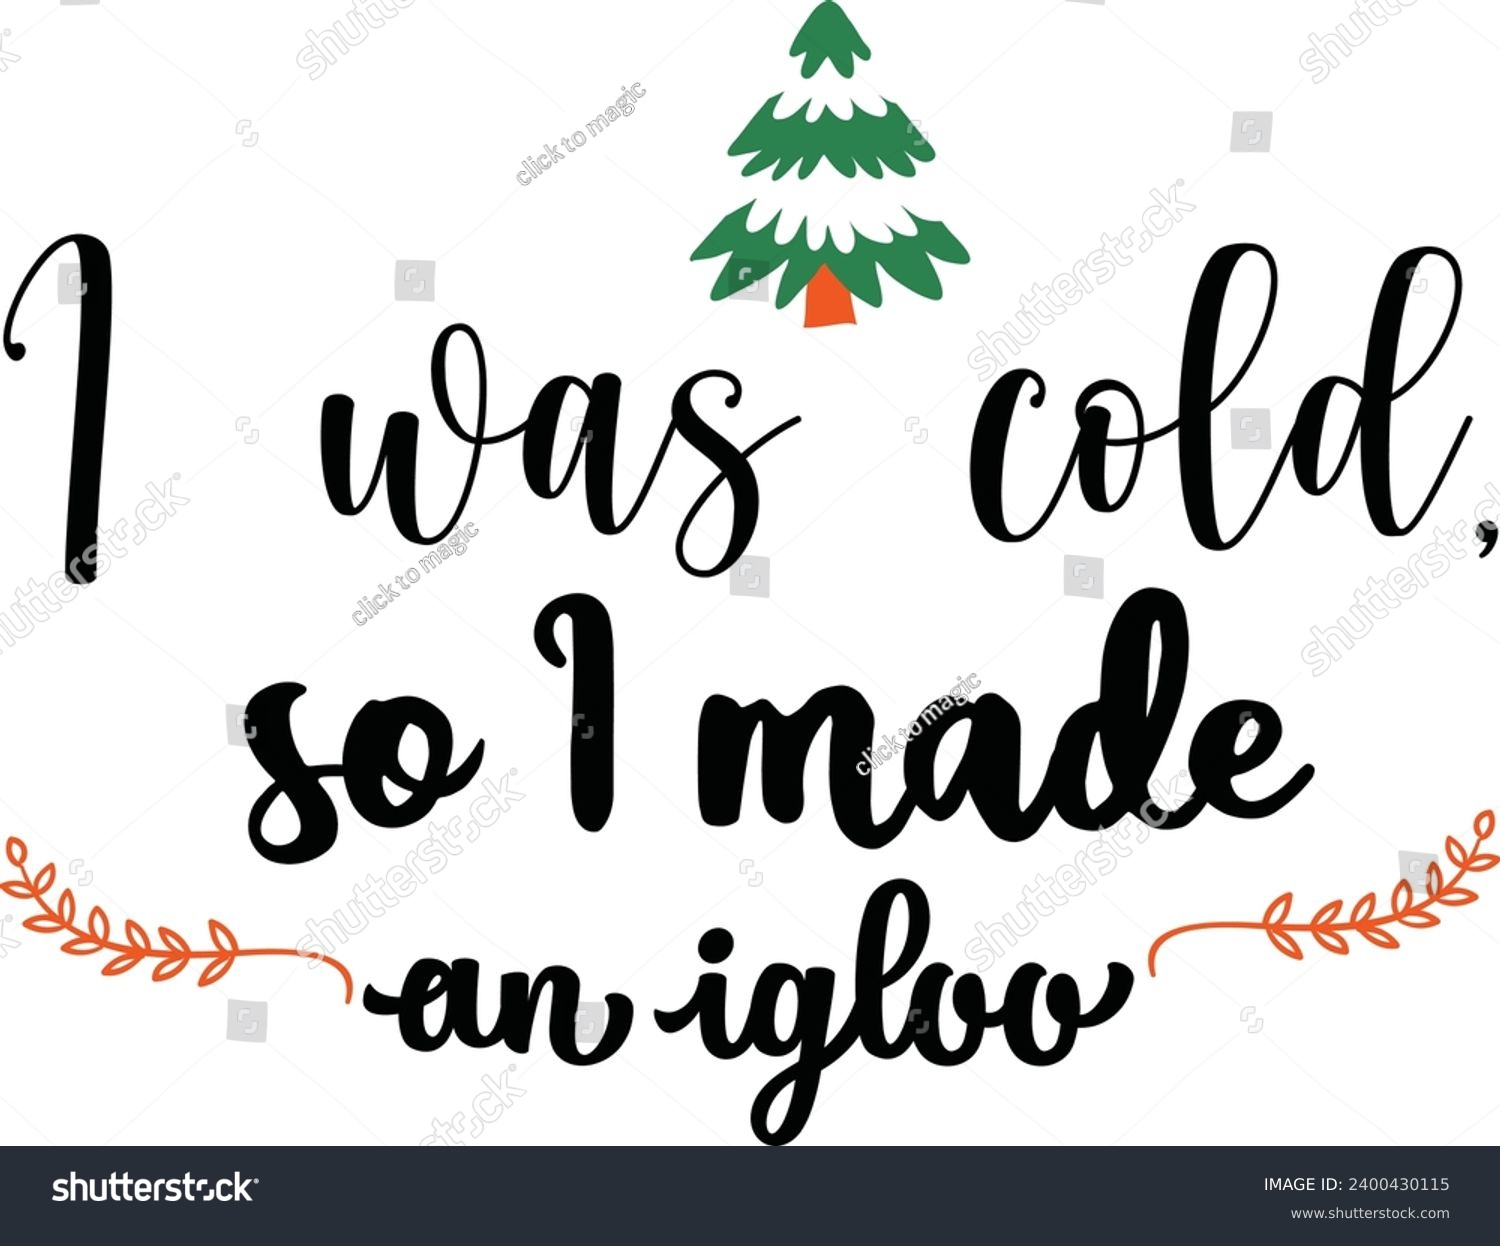 SVG of This is Merry Christmas, T-shirt Design, Files for Cutting, Isolated on white background, Winter Quote, Christmas Saying, Holiday EPS, T-shirt, Santa Claus Hat, New Year EPS, Snowflakes  svg